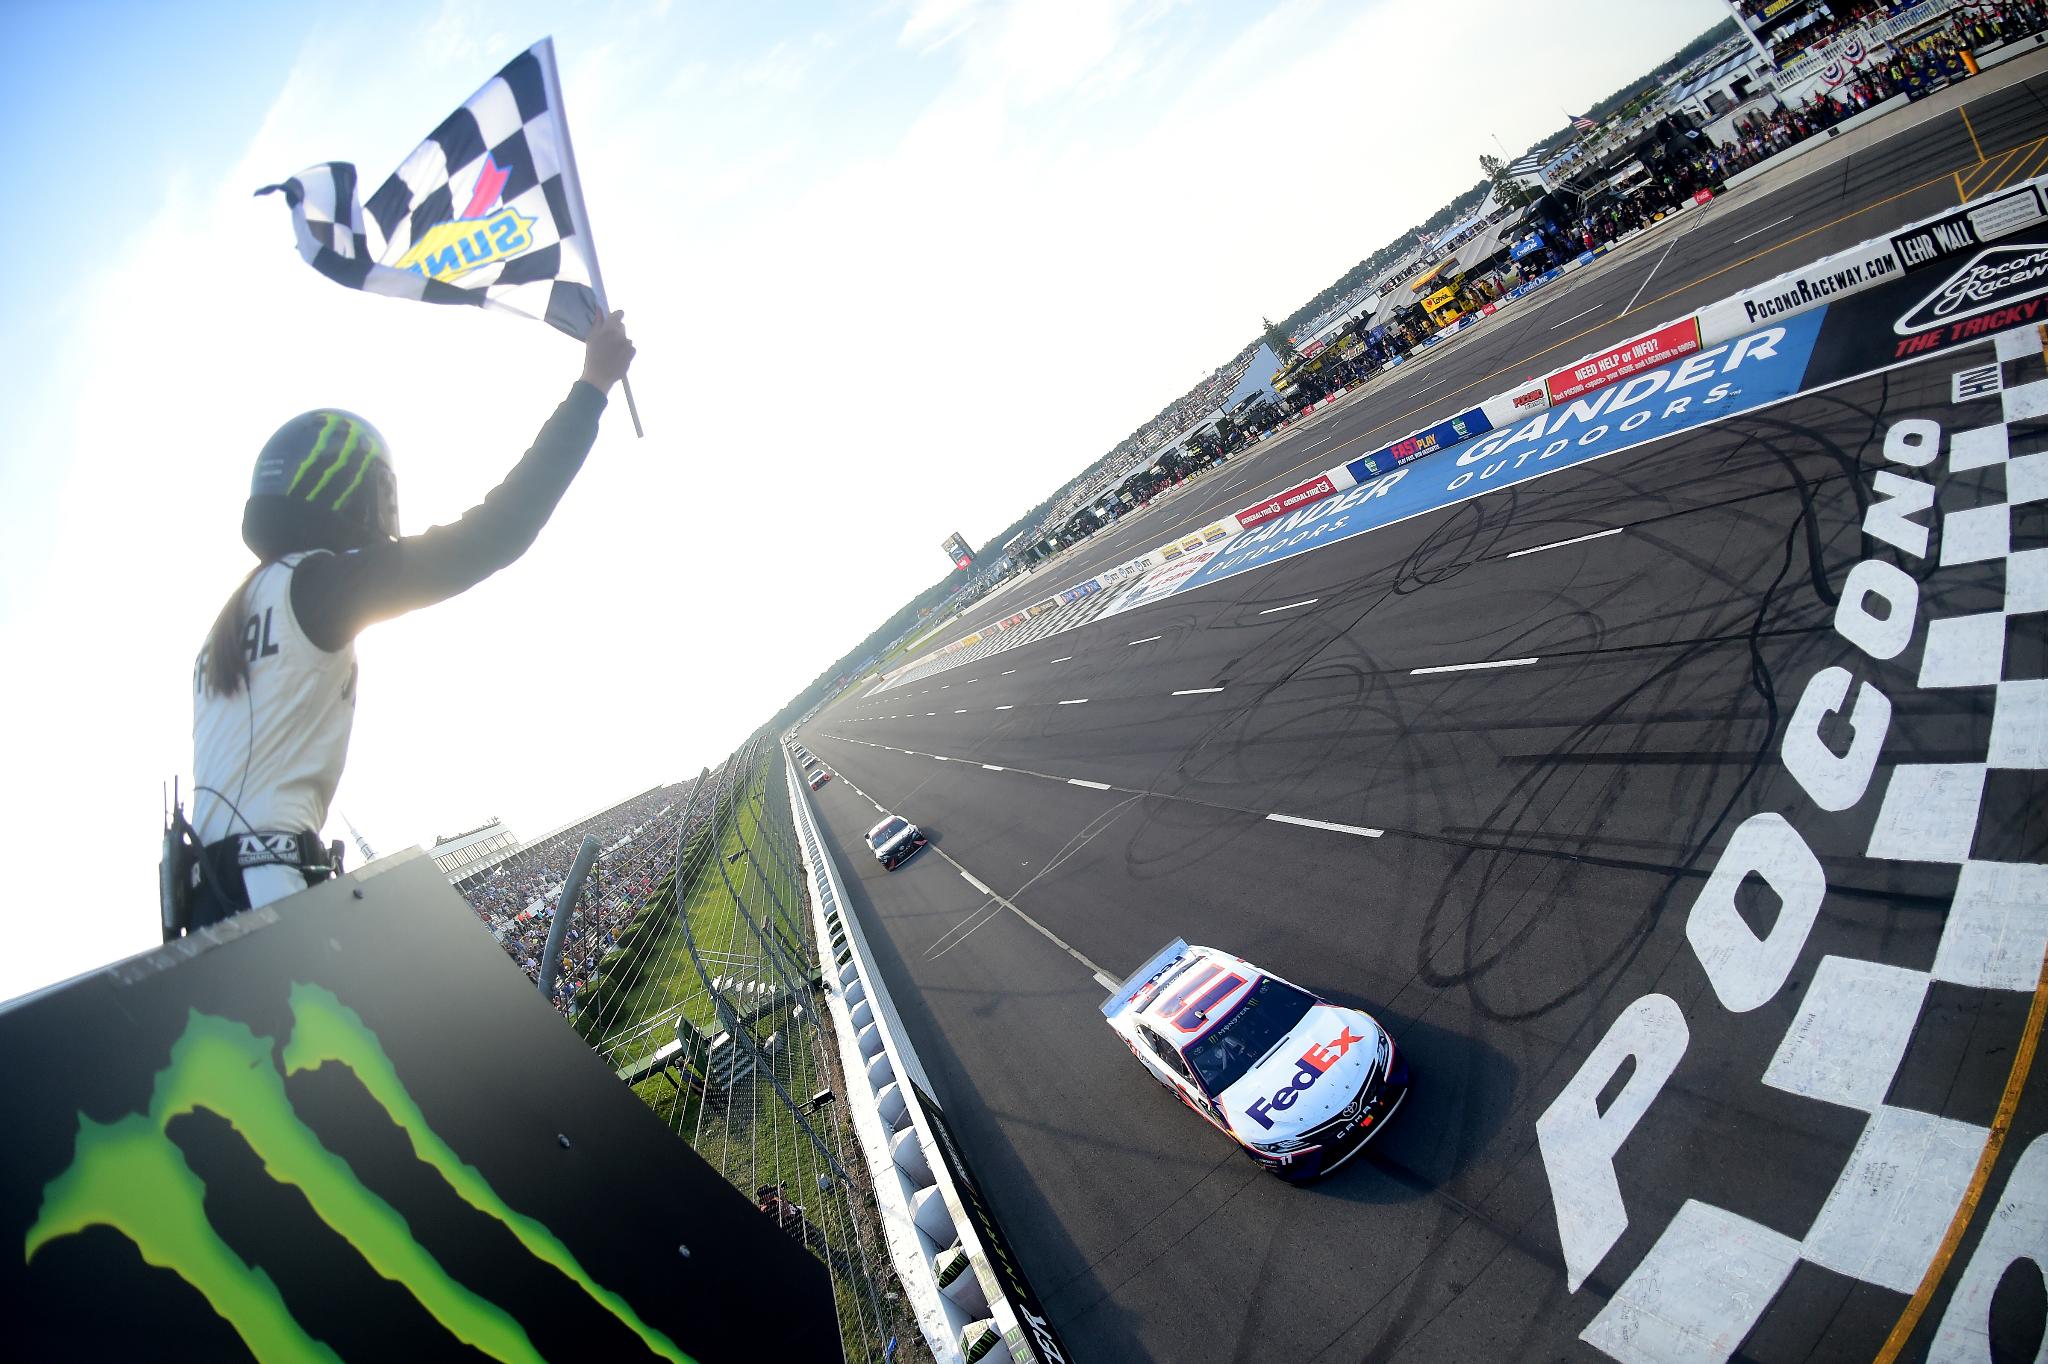 Hamlin loved the traction compound in winning at Pocono